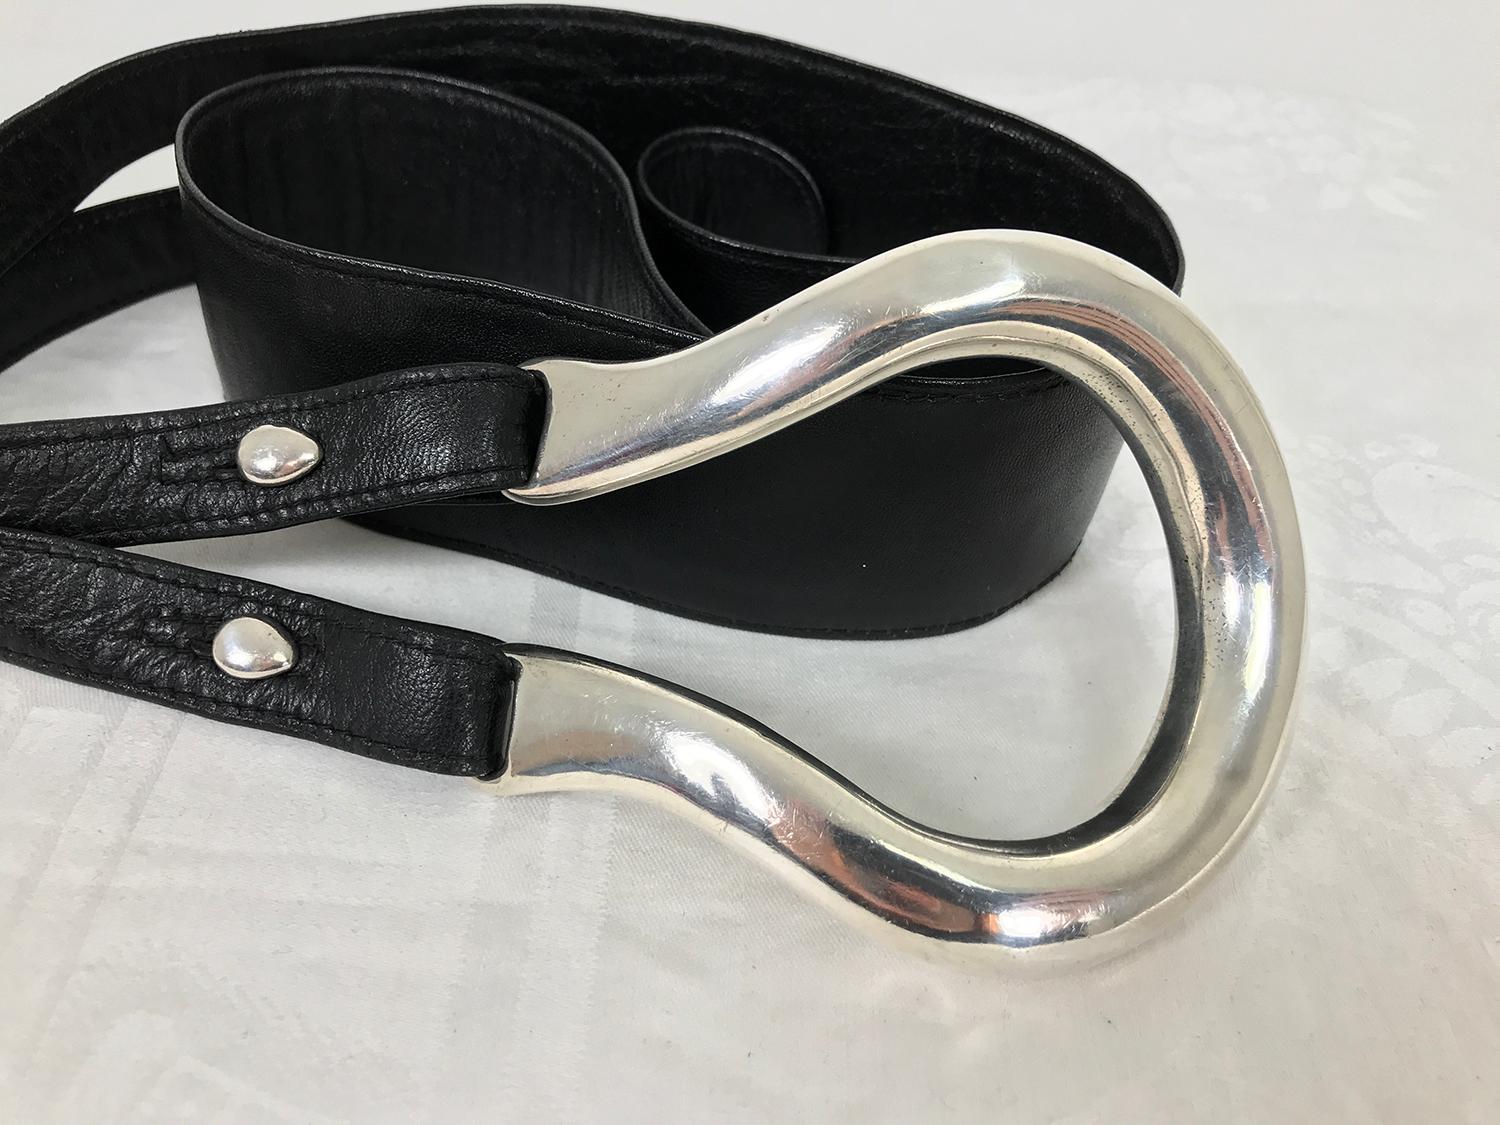 Large sterling silver horse shoe belt buckle and three leather belt straps, the white one is marked Tiffany. The buckle isn't marked anything but has tested sterling, the buttons are marked sterling. These belts designed by Elsa Peretti for Tiffany